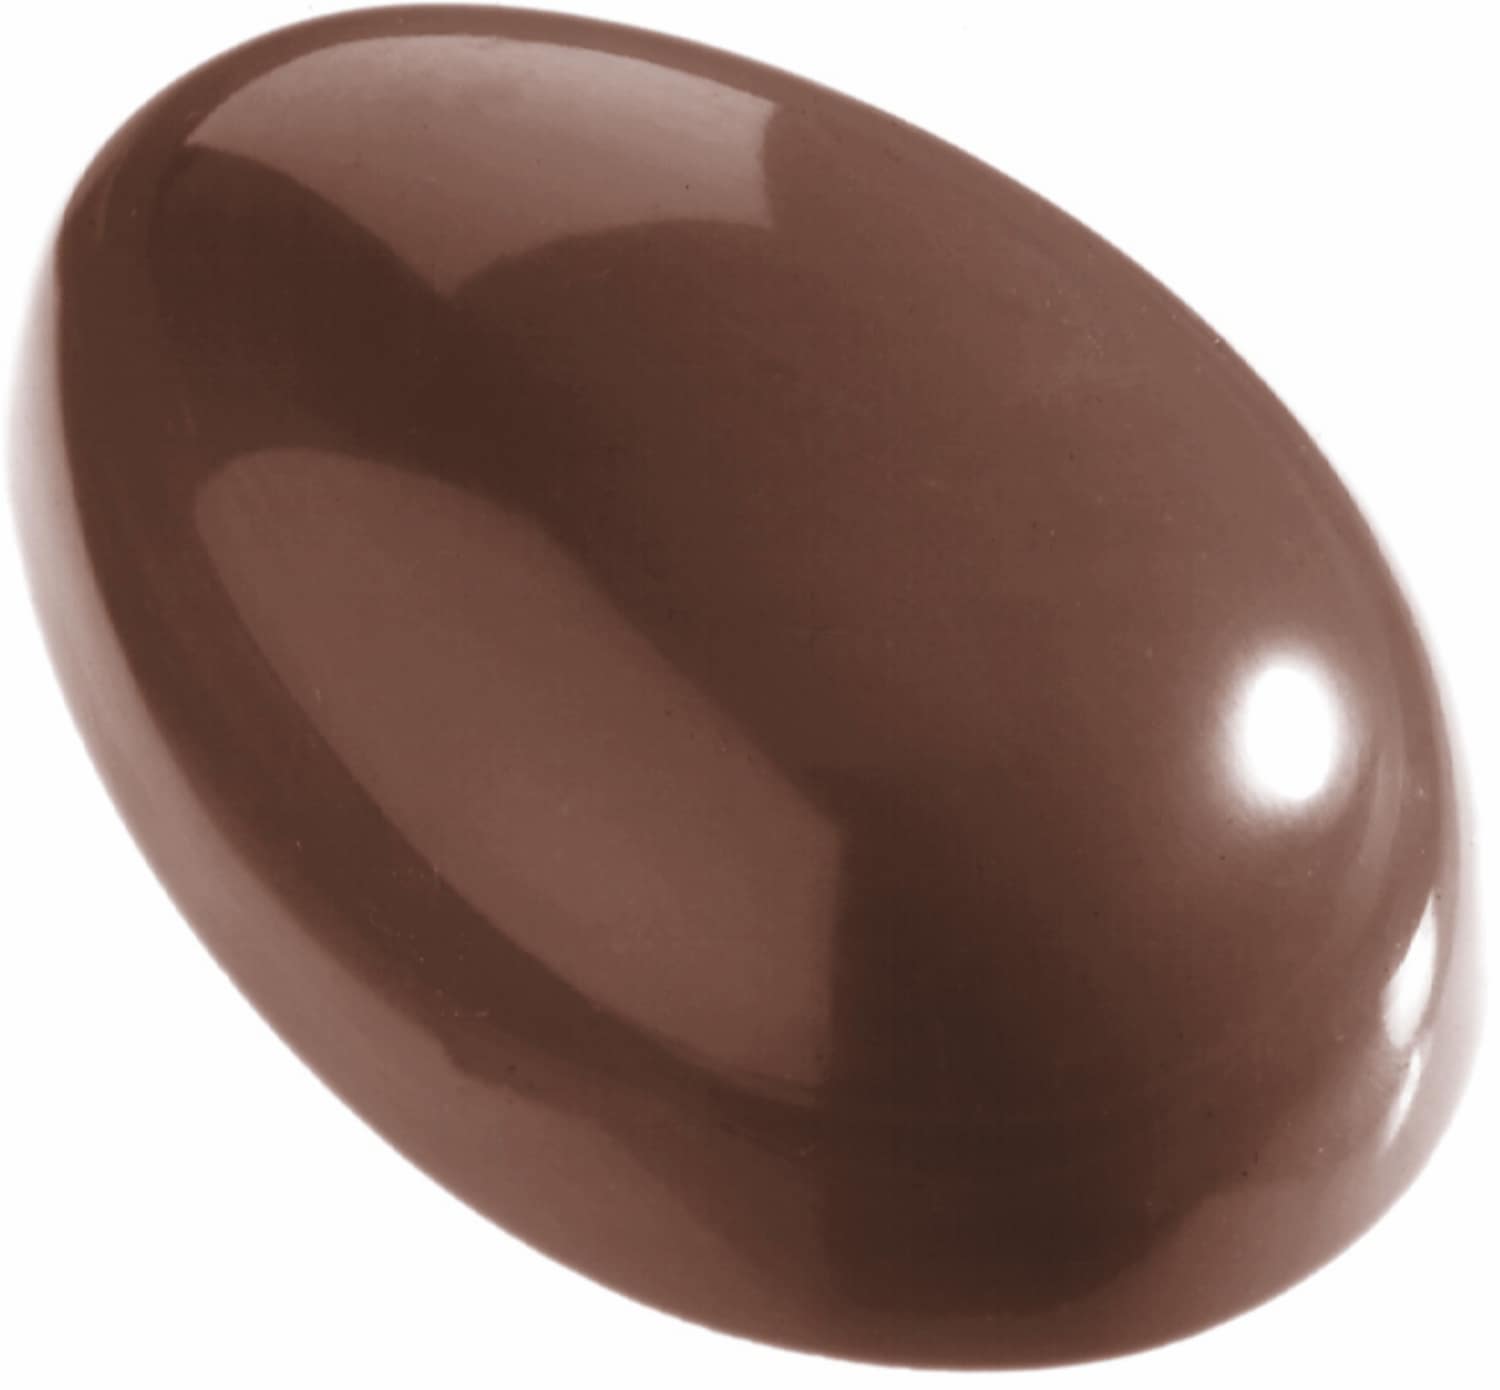 Chocolate mould "Easter egg" 421255